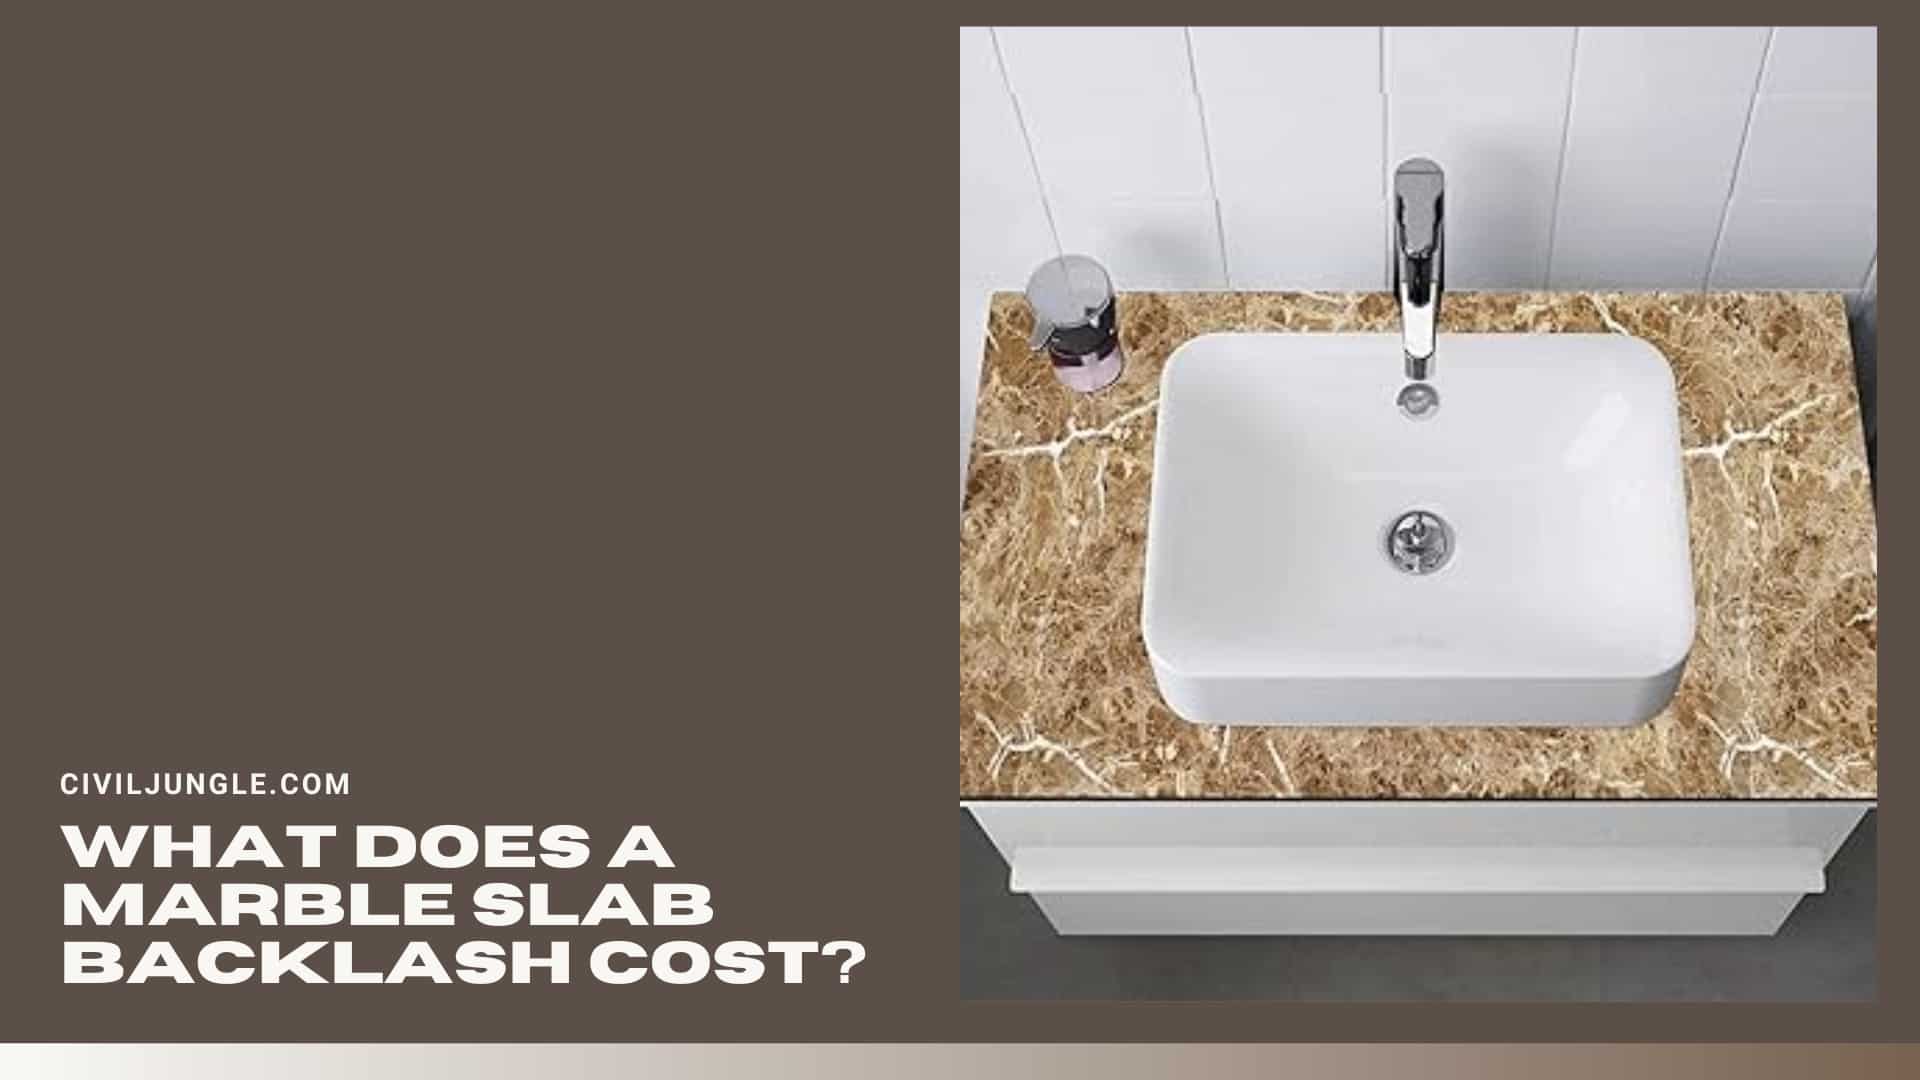 What Does a Marble Slab Backlash Cost?